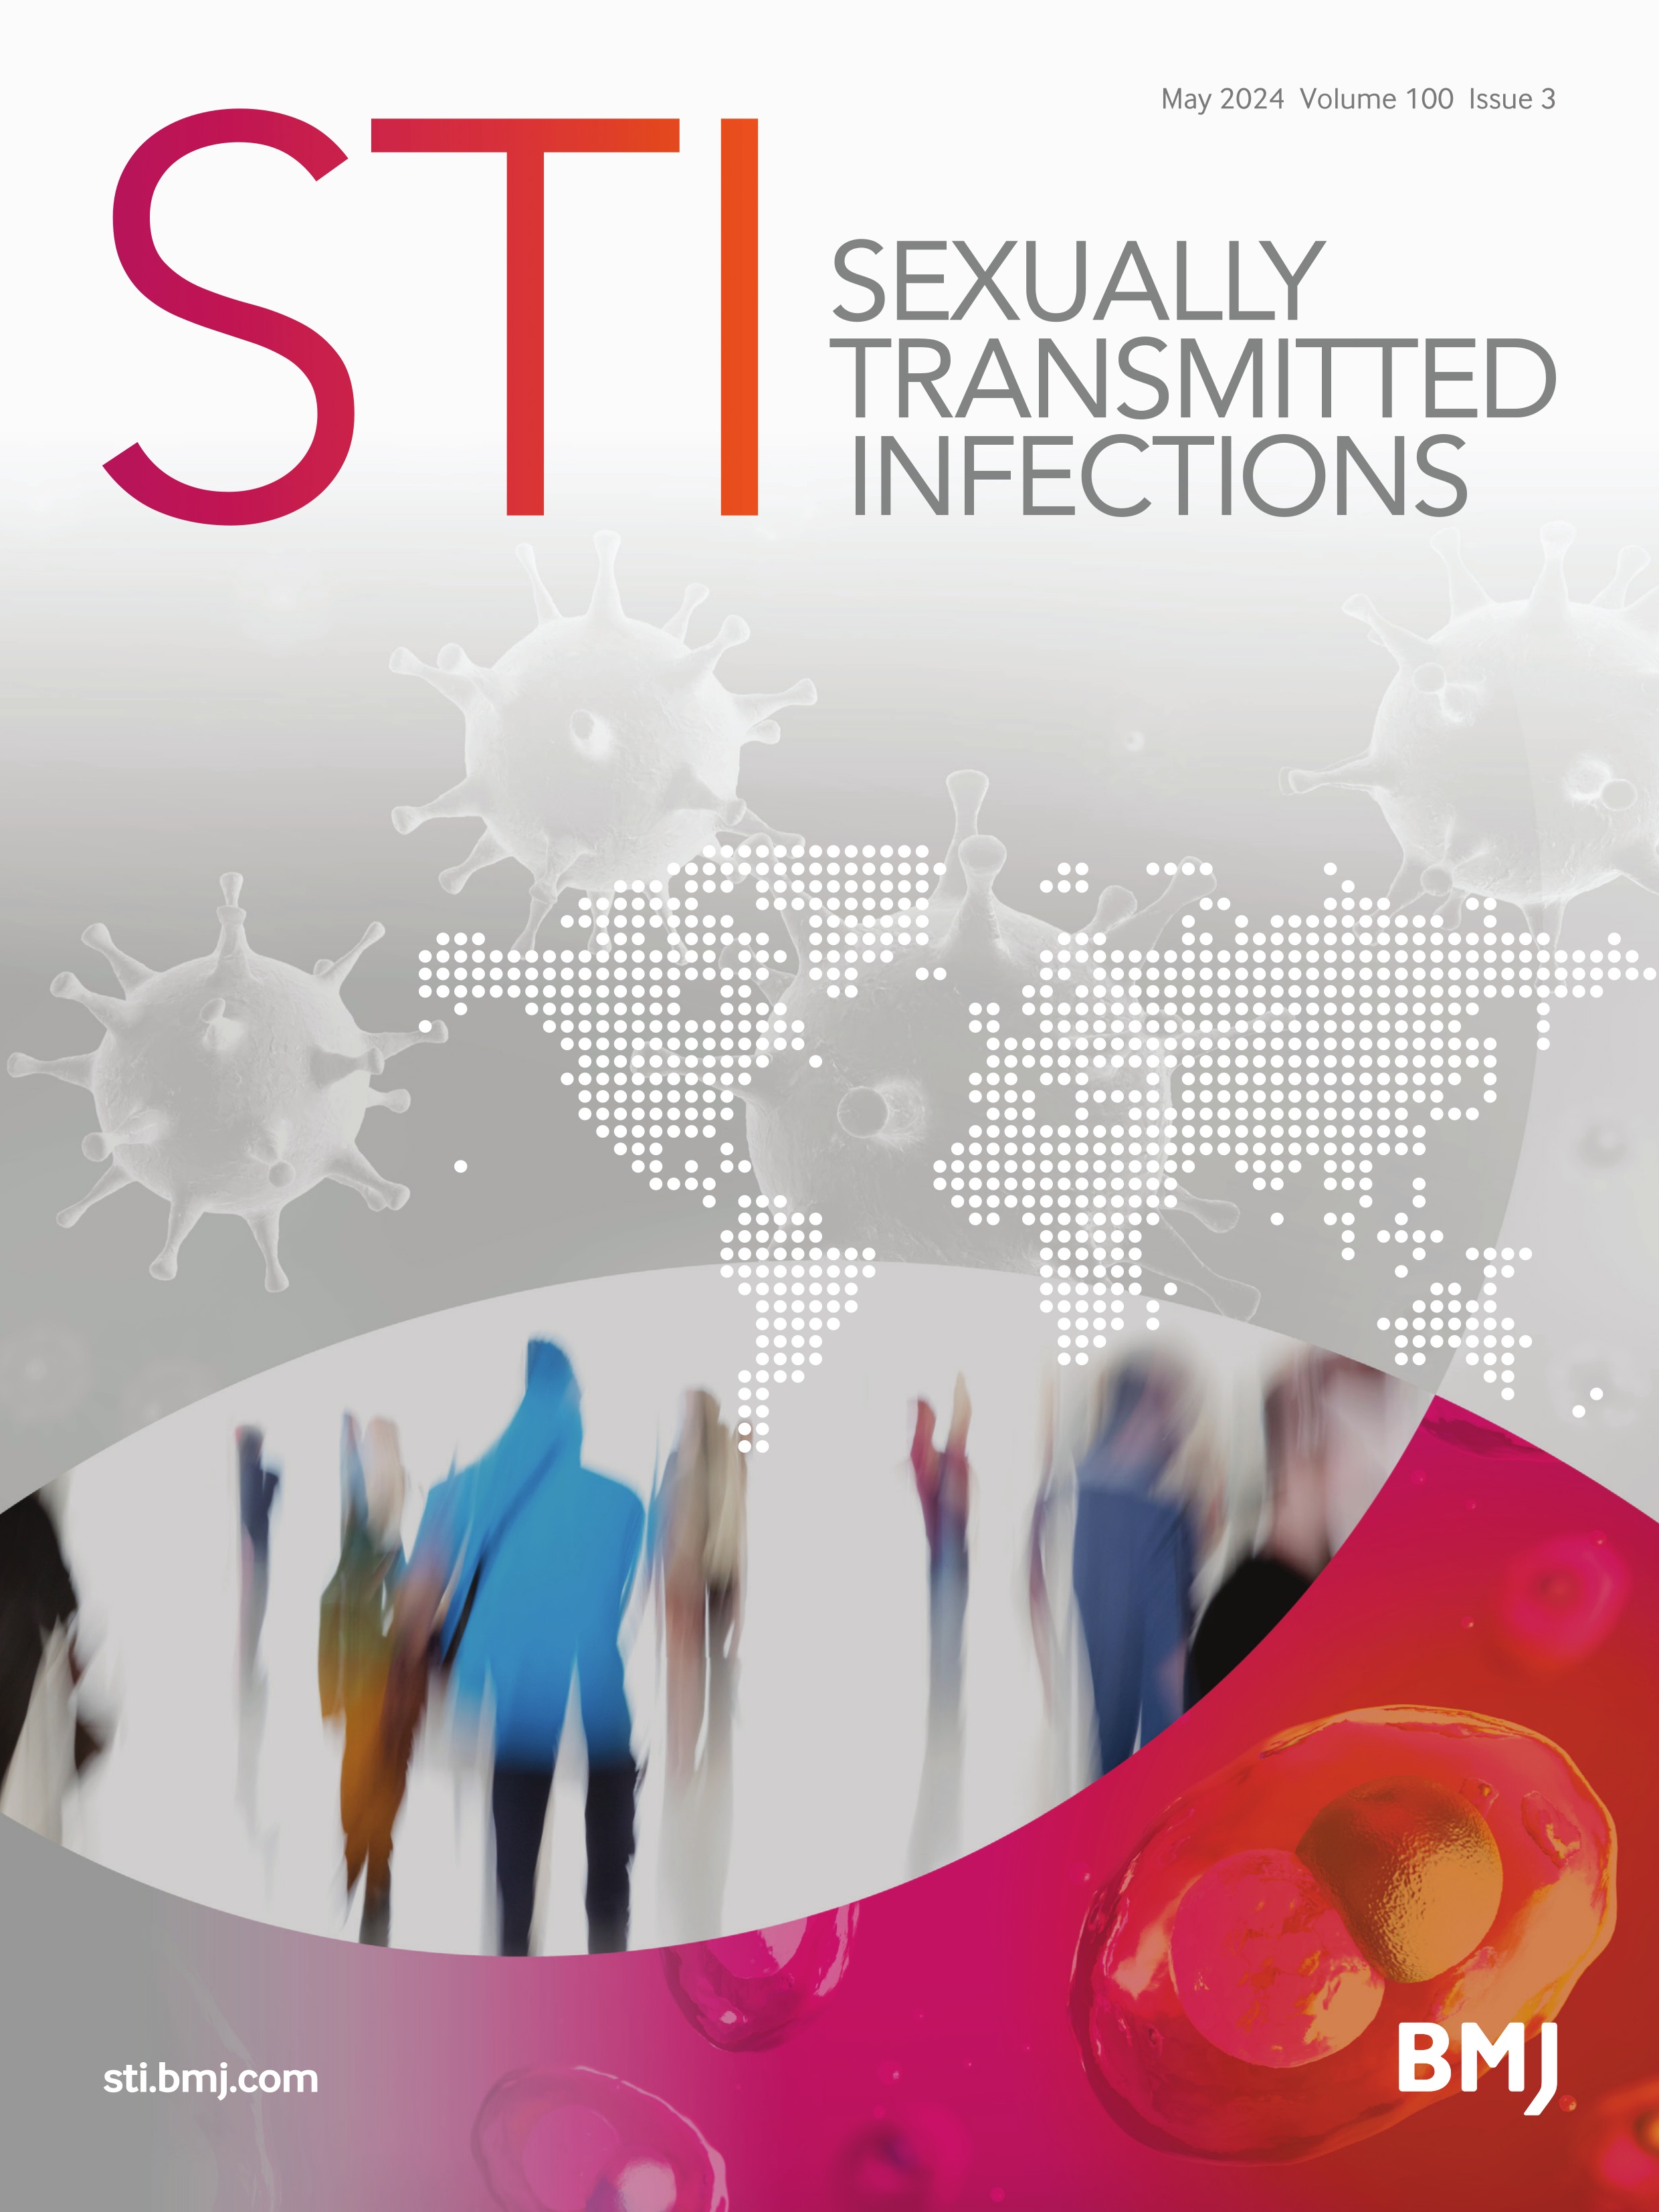 Assessing the effectiveness of HIV/STI risk communication displays among Melbourne Sexual Health Centre attendees: a cross-sectional, observational and vignette-based study